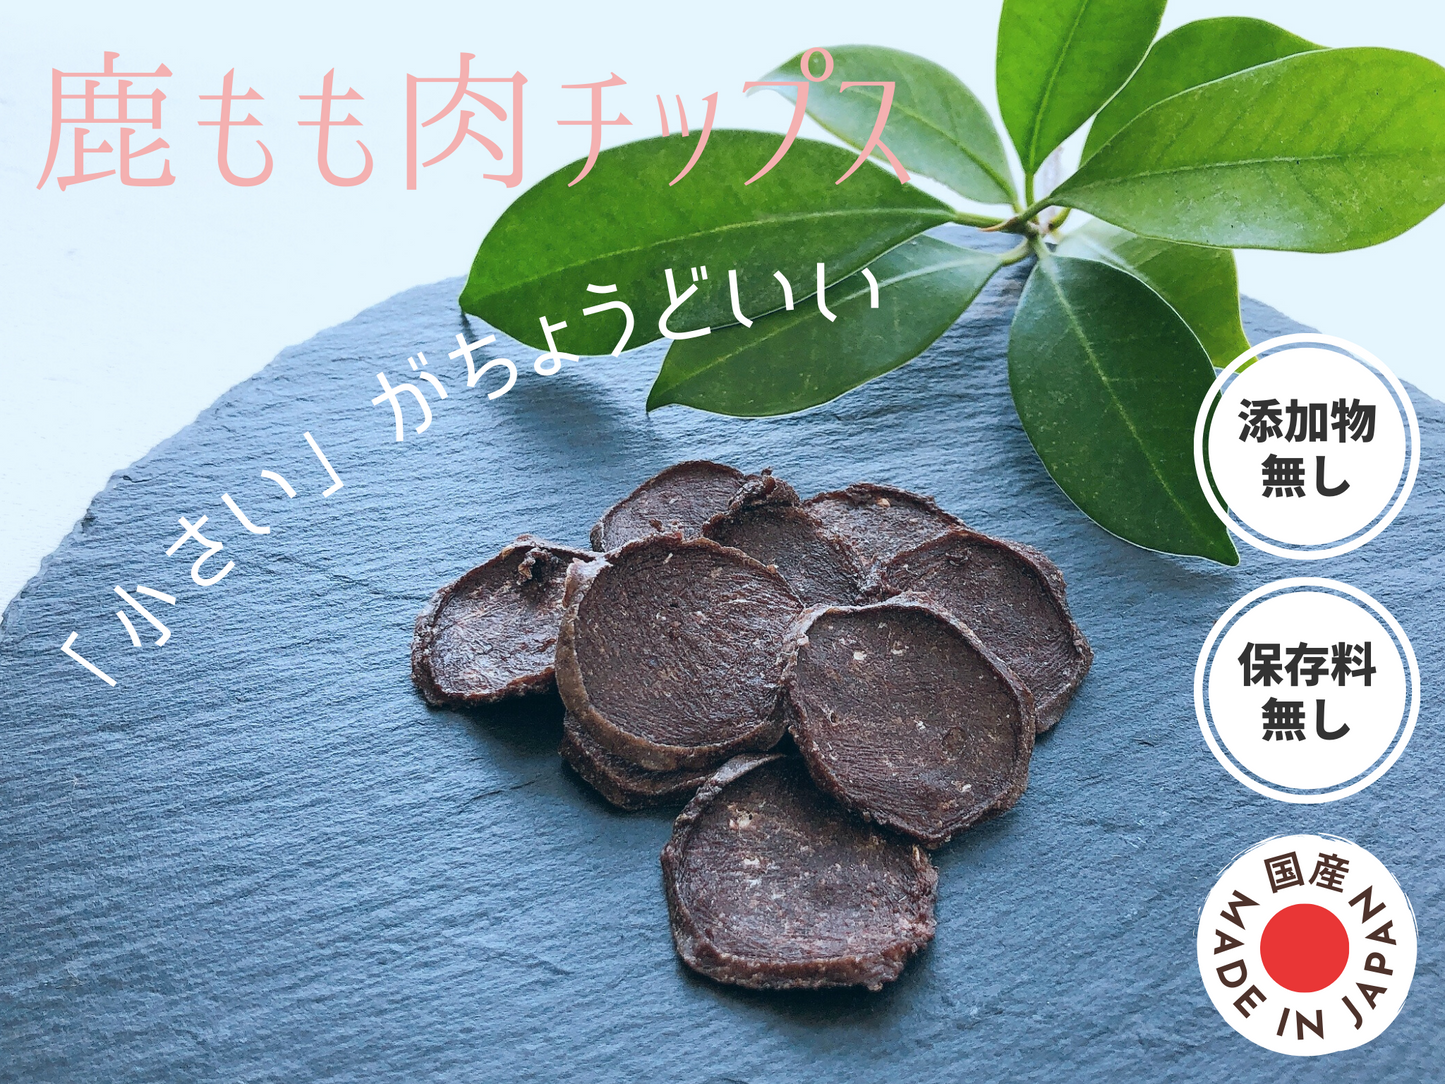 No.54 Venison Thigh Meat Chips Jerky Made in Japan No Additives Dogs Cats Snacks 